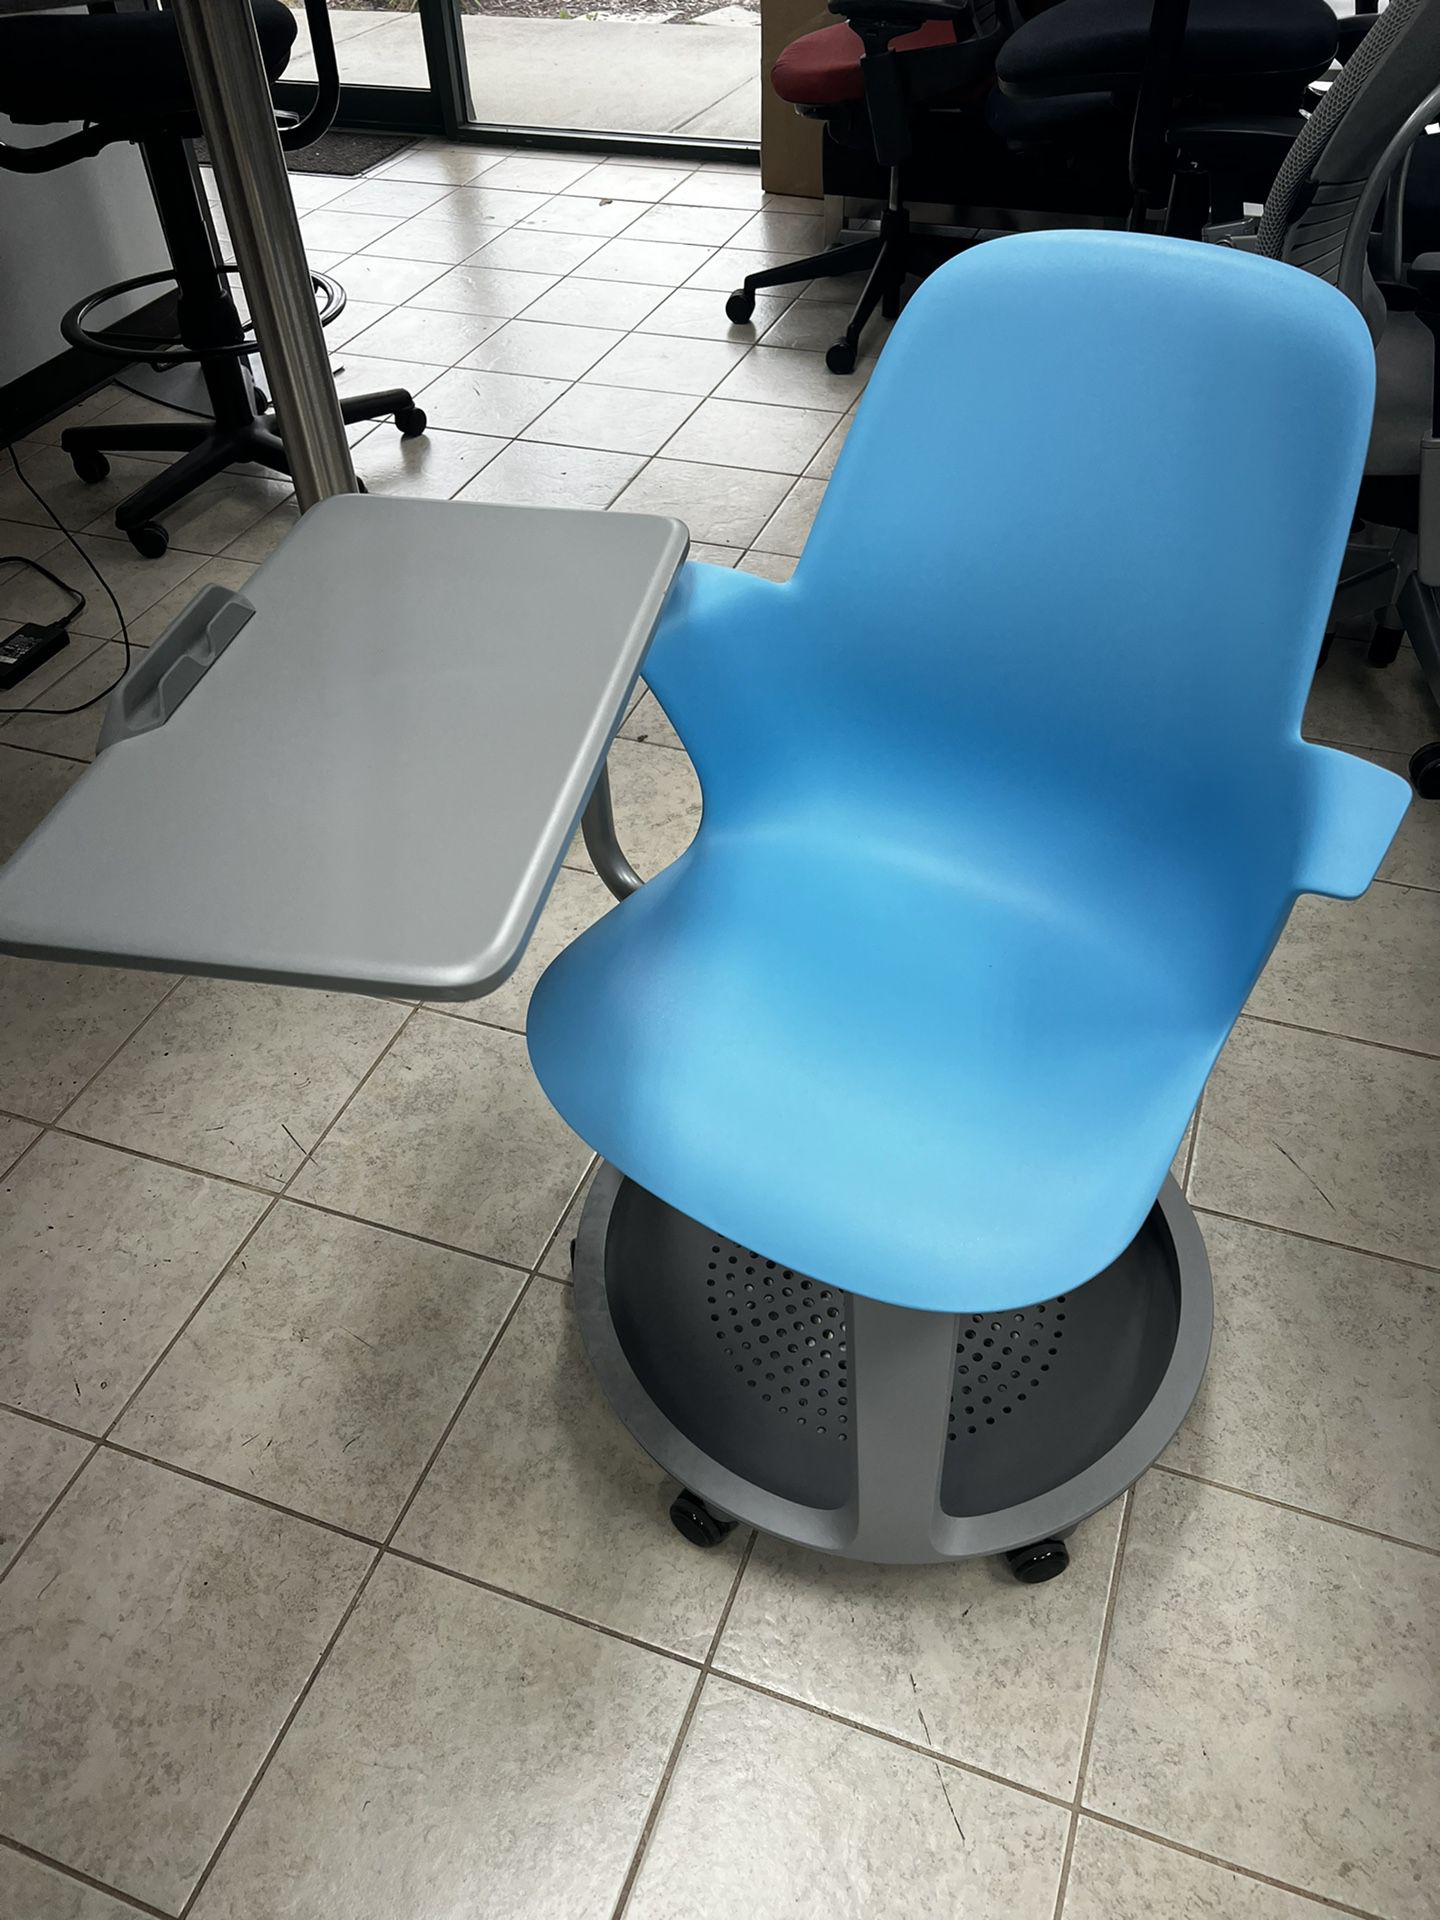 Swivel Chair With Movable Desktop And Cup Holder 